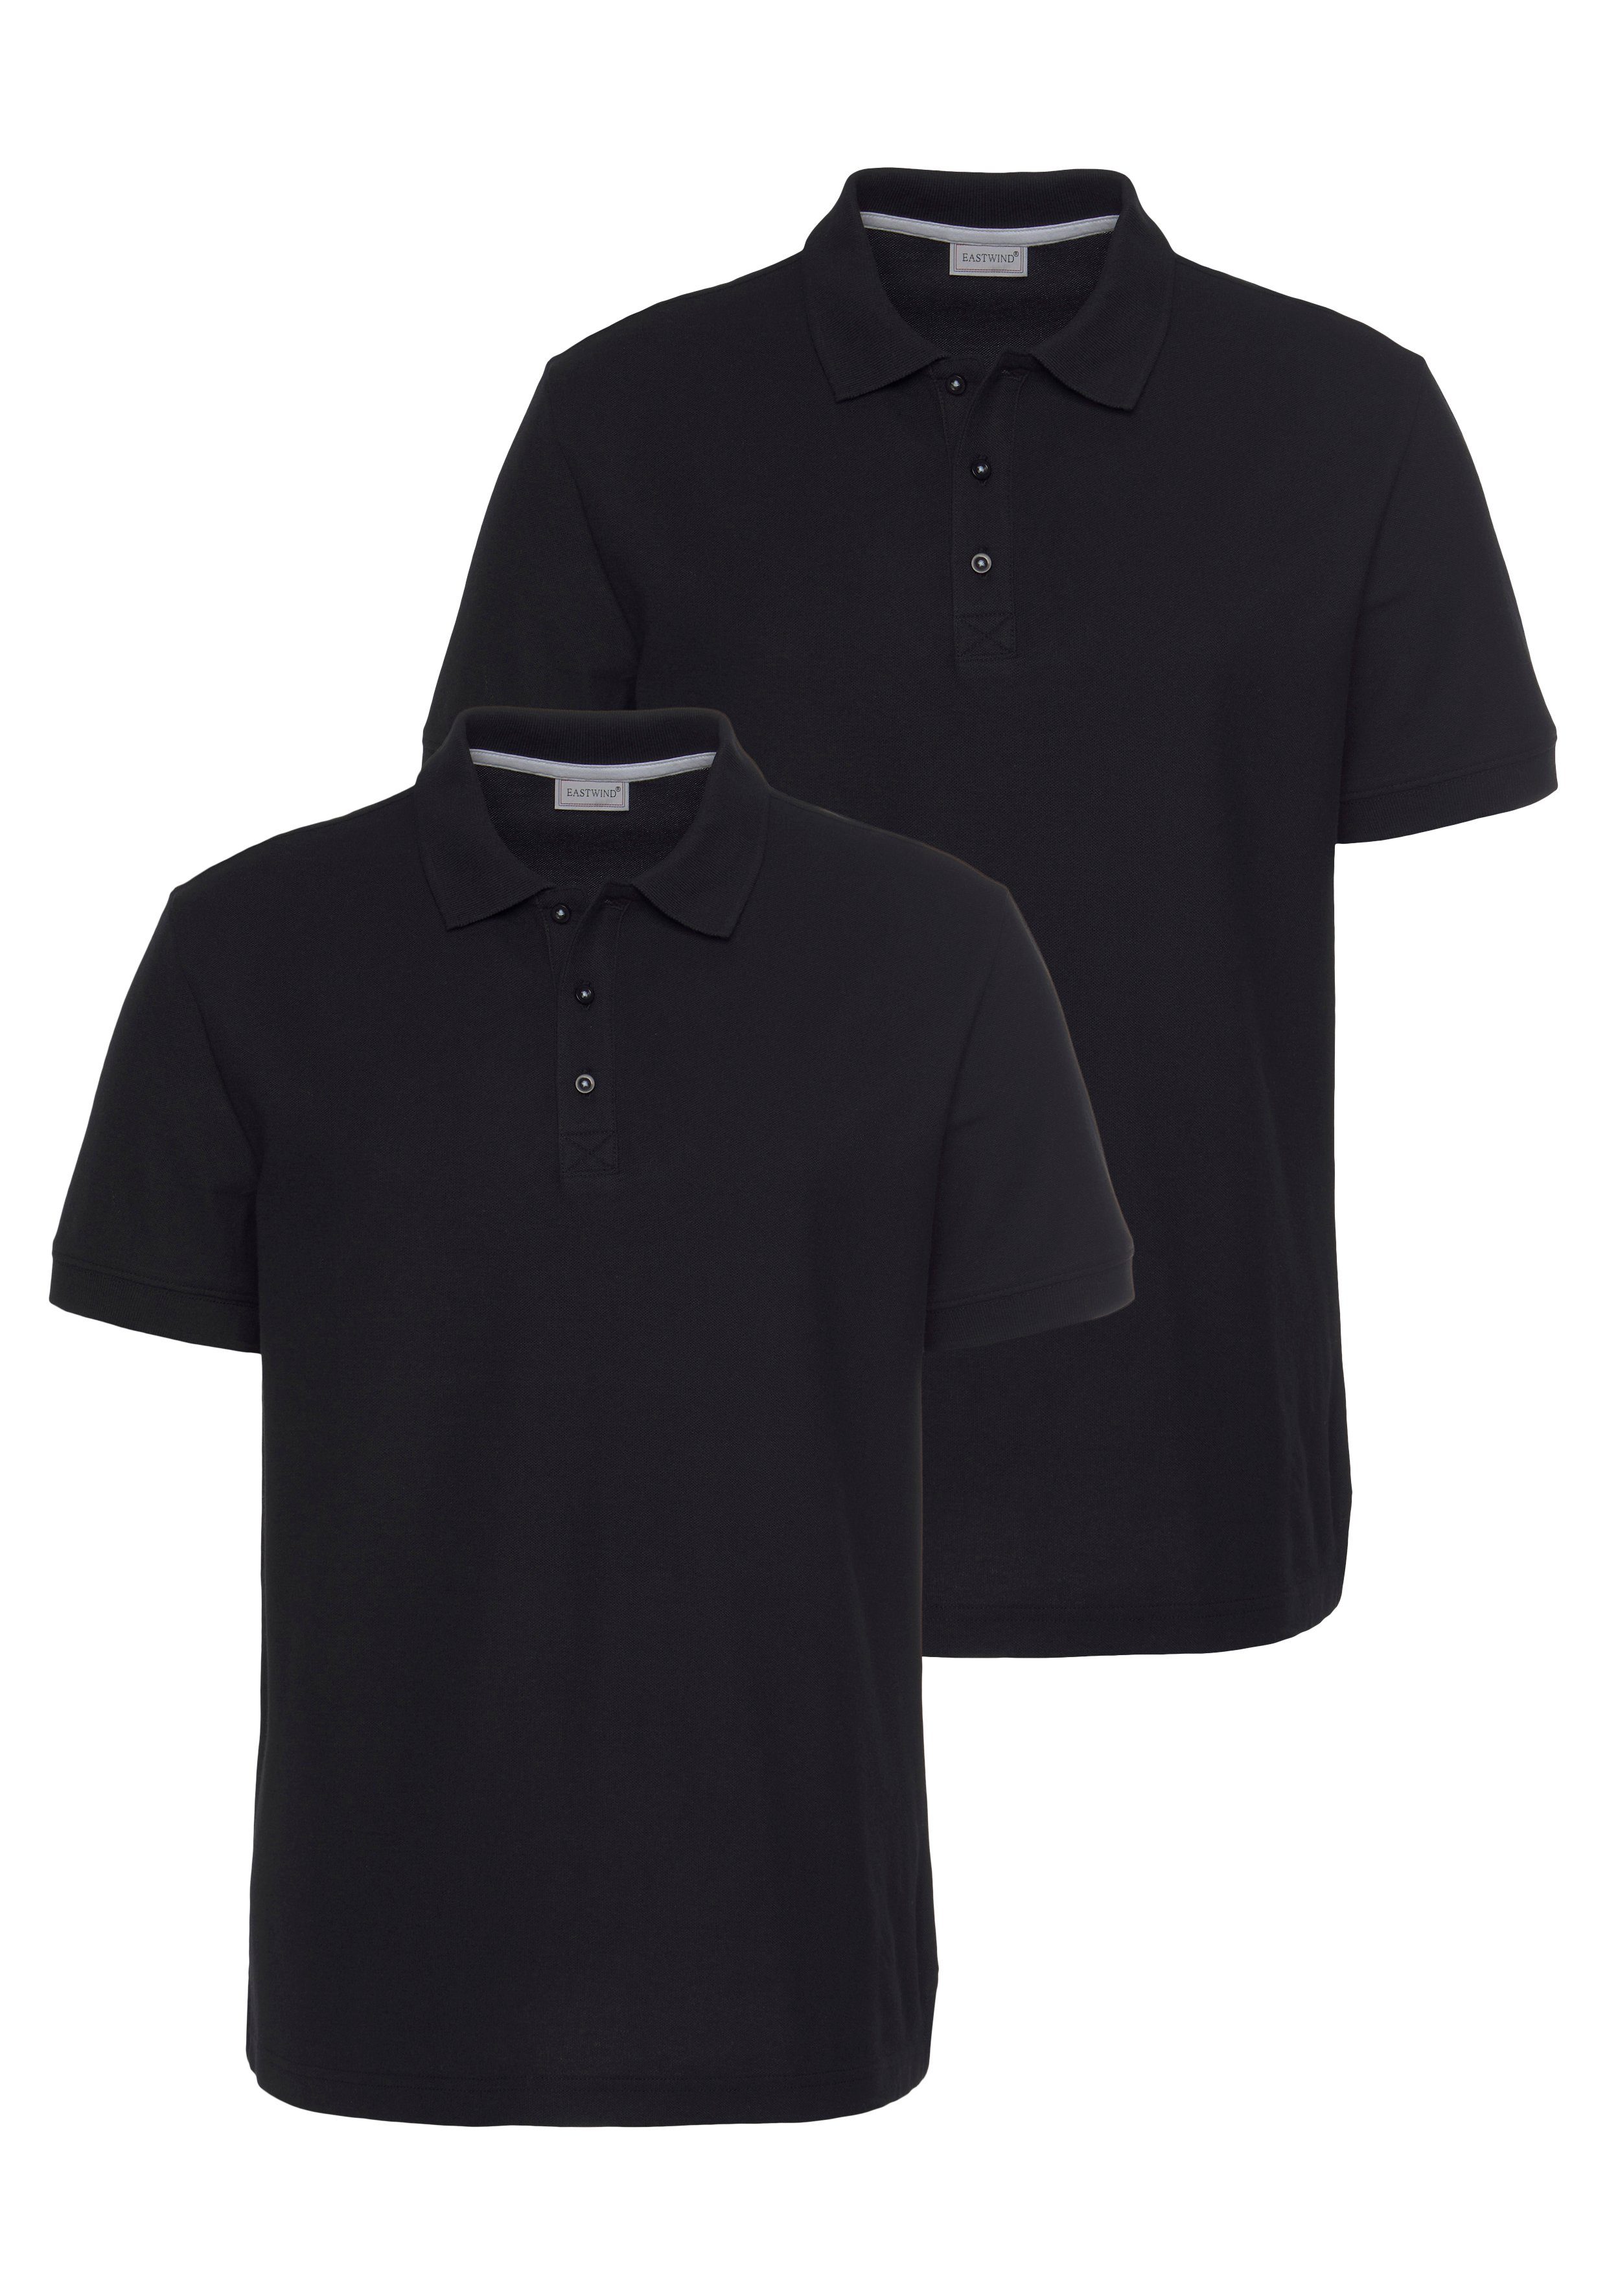 Eastwind Poloshirt Double Pack Polo, navy+white (2er-Pack) schwarz